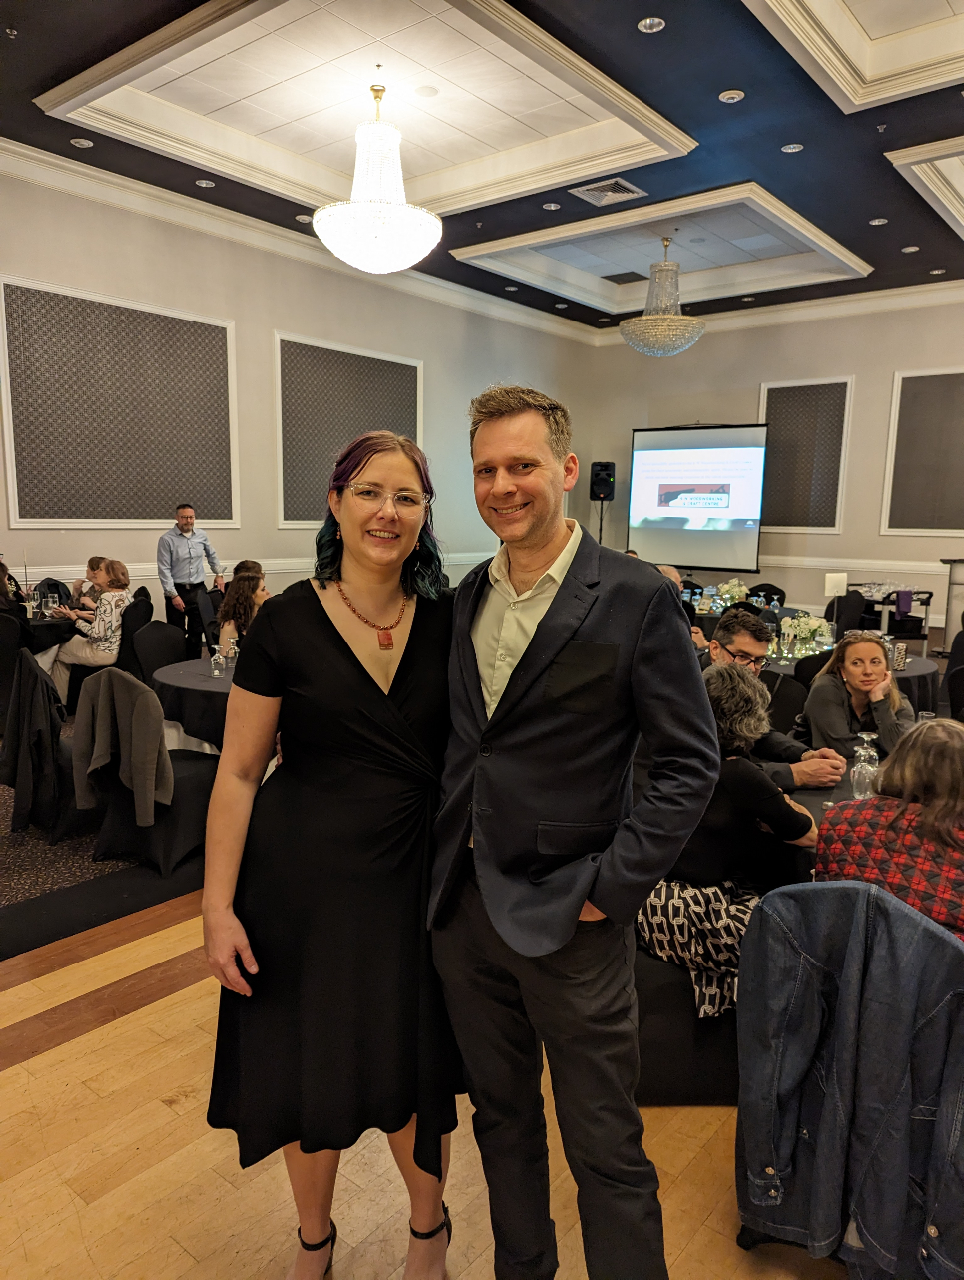 This post features guest speaker Becky Verdun and her partner posing and smiling. Beck wears a knee-length black dress, and her partner wears a grey suit with a white dress shirt.